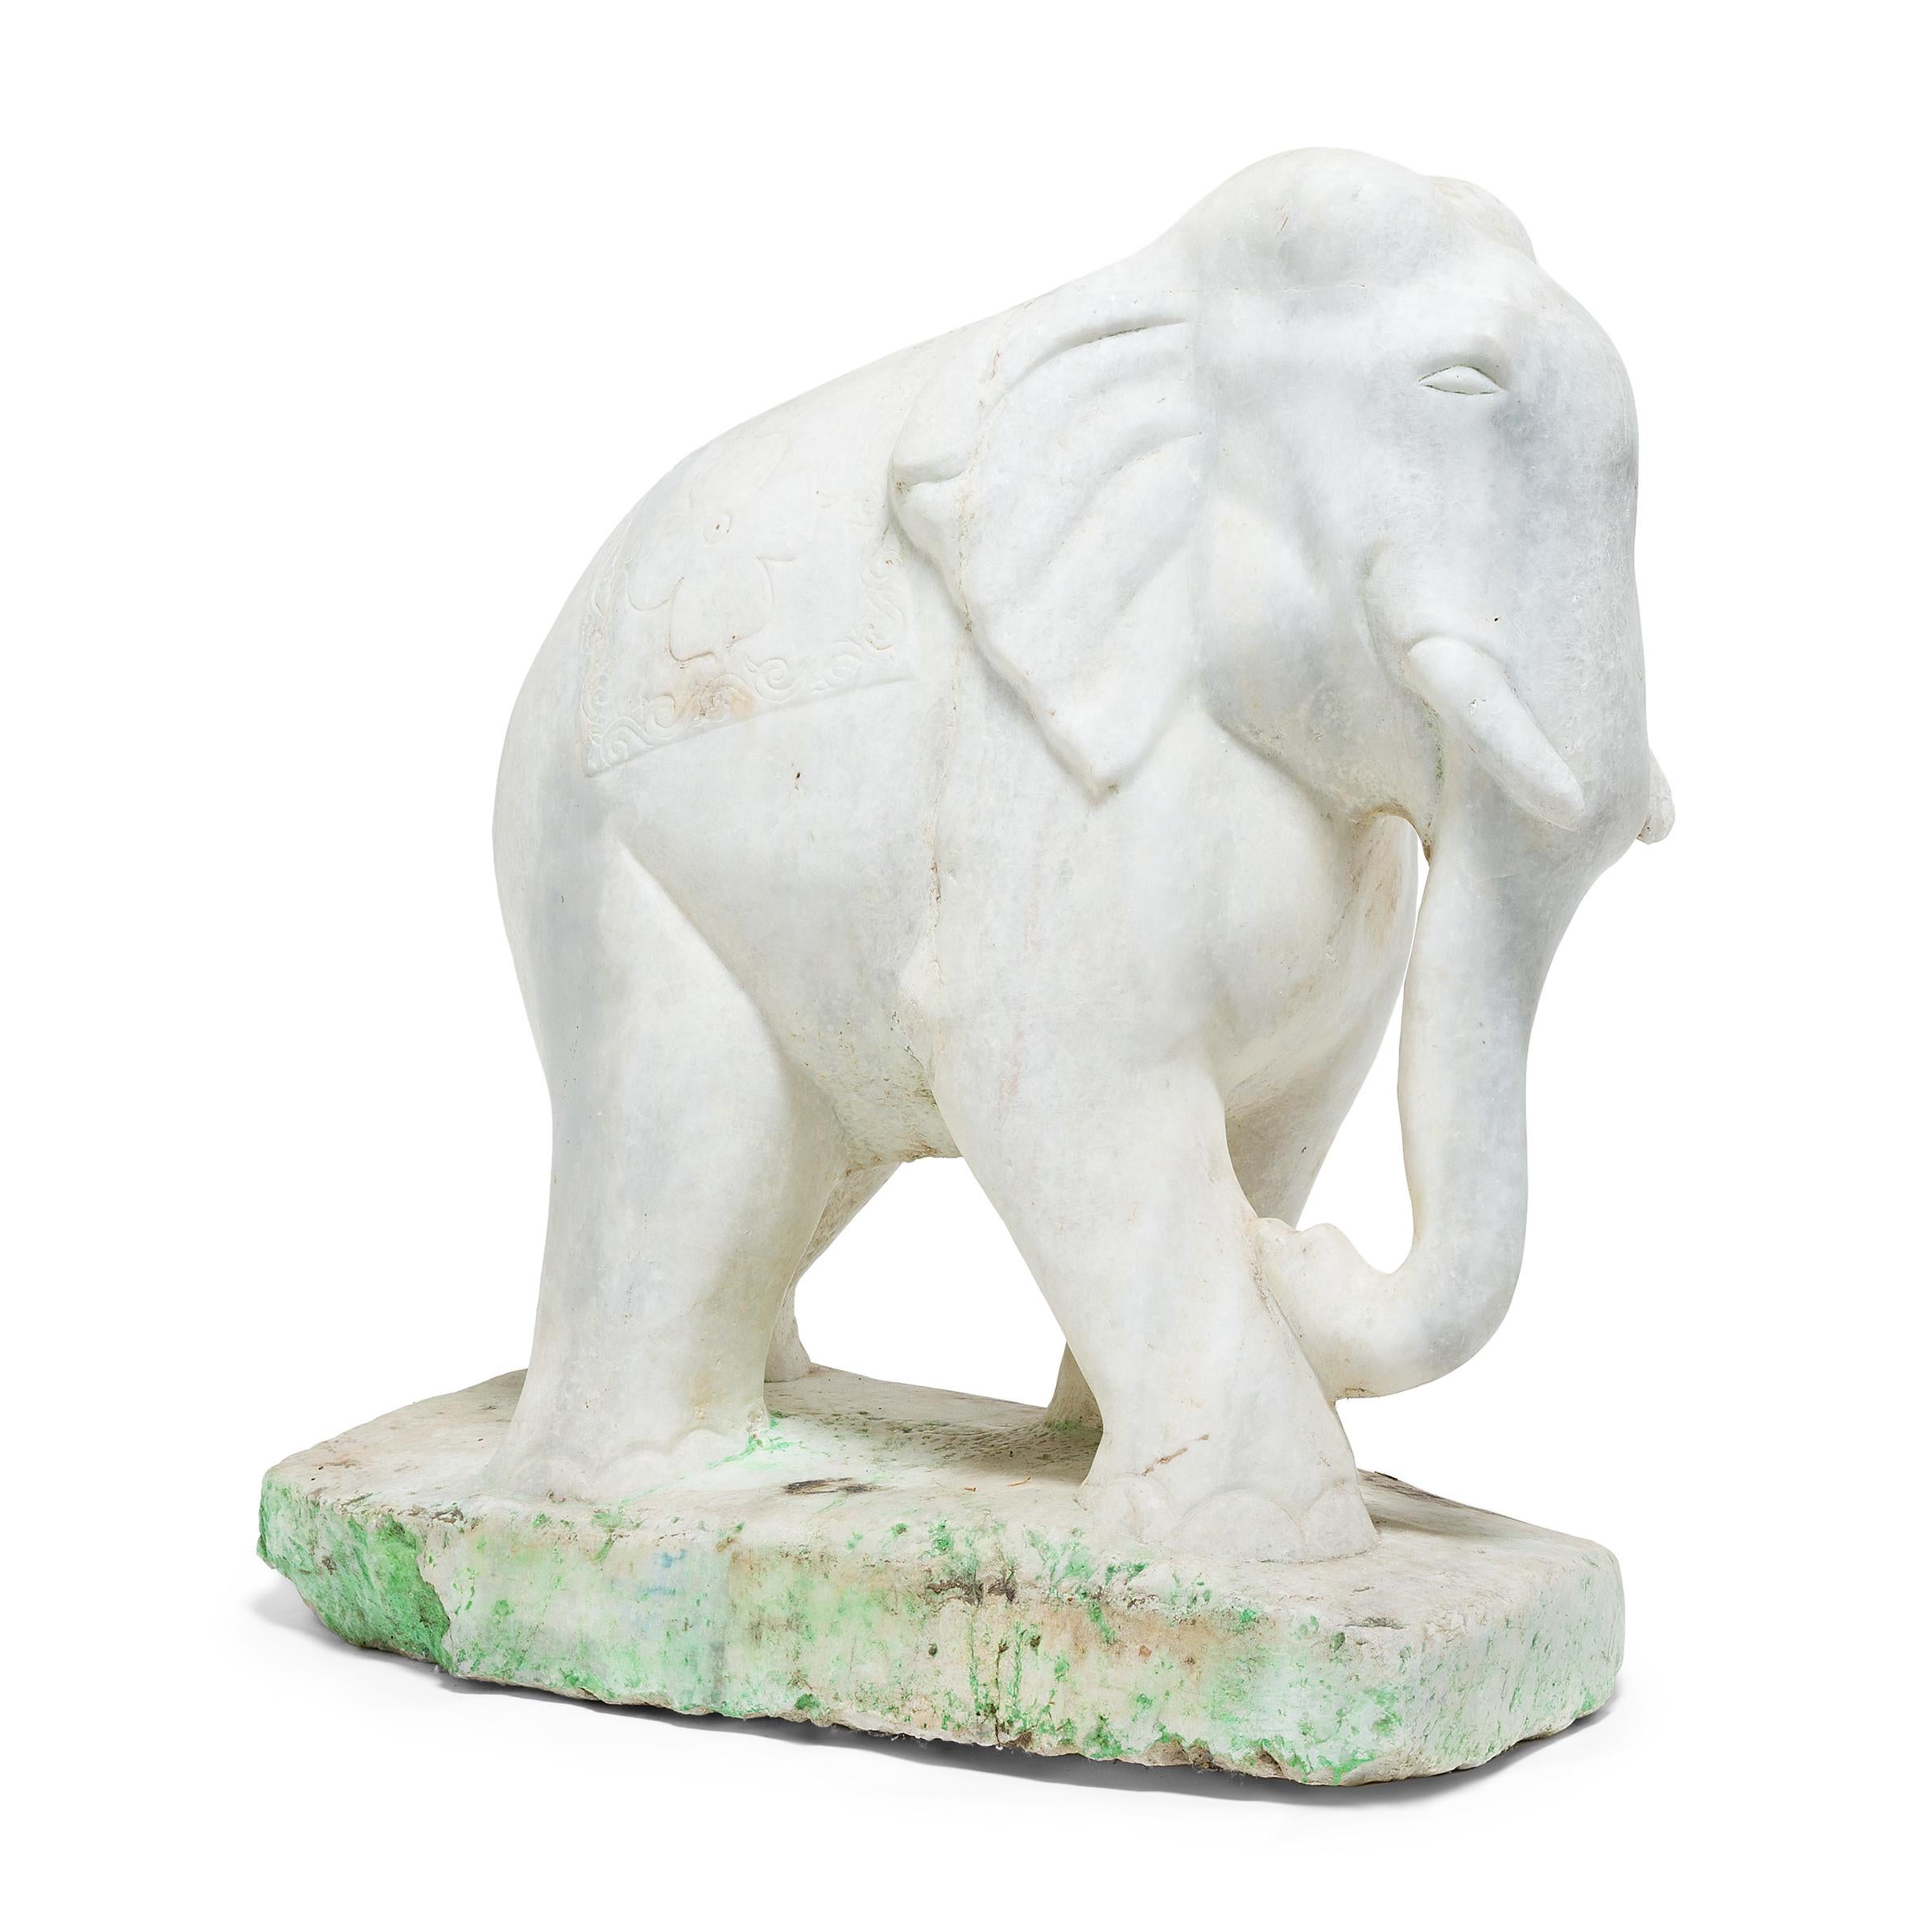 This impressive Thai elephant sculpture was carved mid-stride from a solid block of white marble. A symbol of strength, loyalty, and longevity, the elephant holds great cultural significance in Thailand and today reigns as the country's national